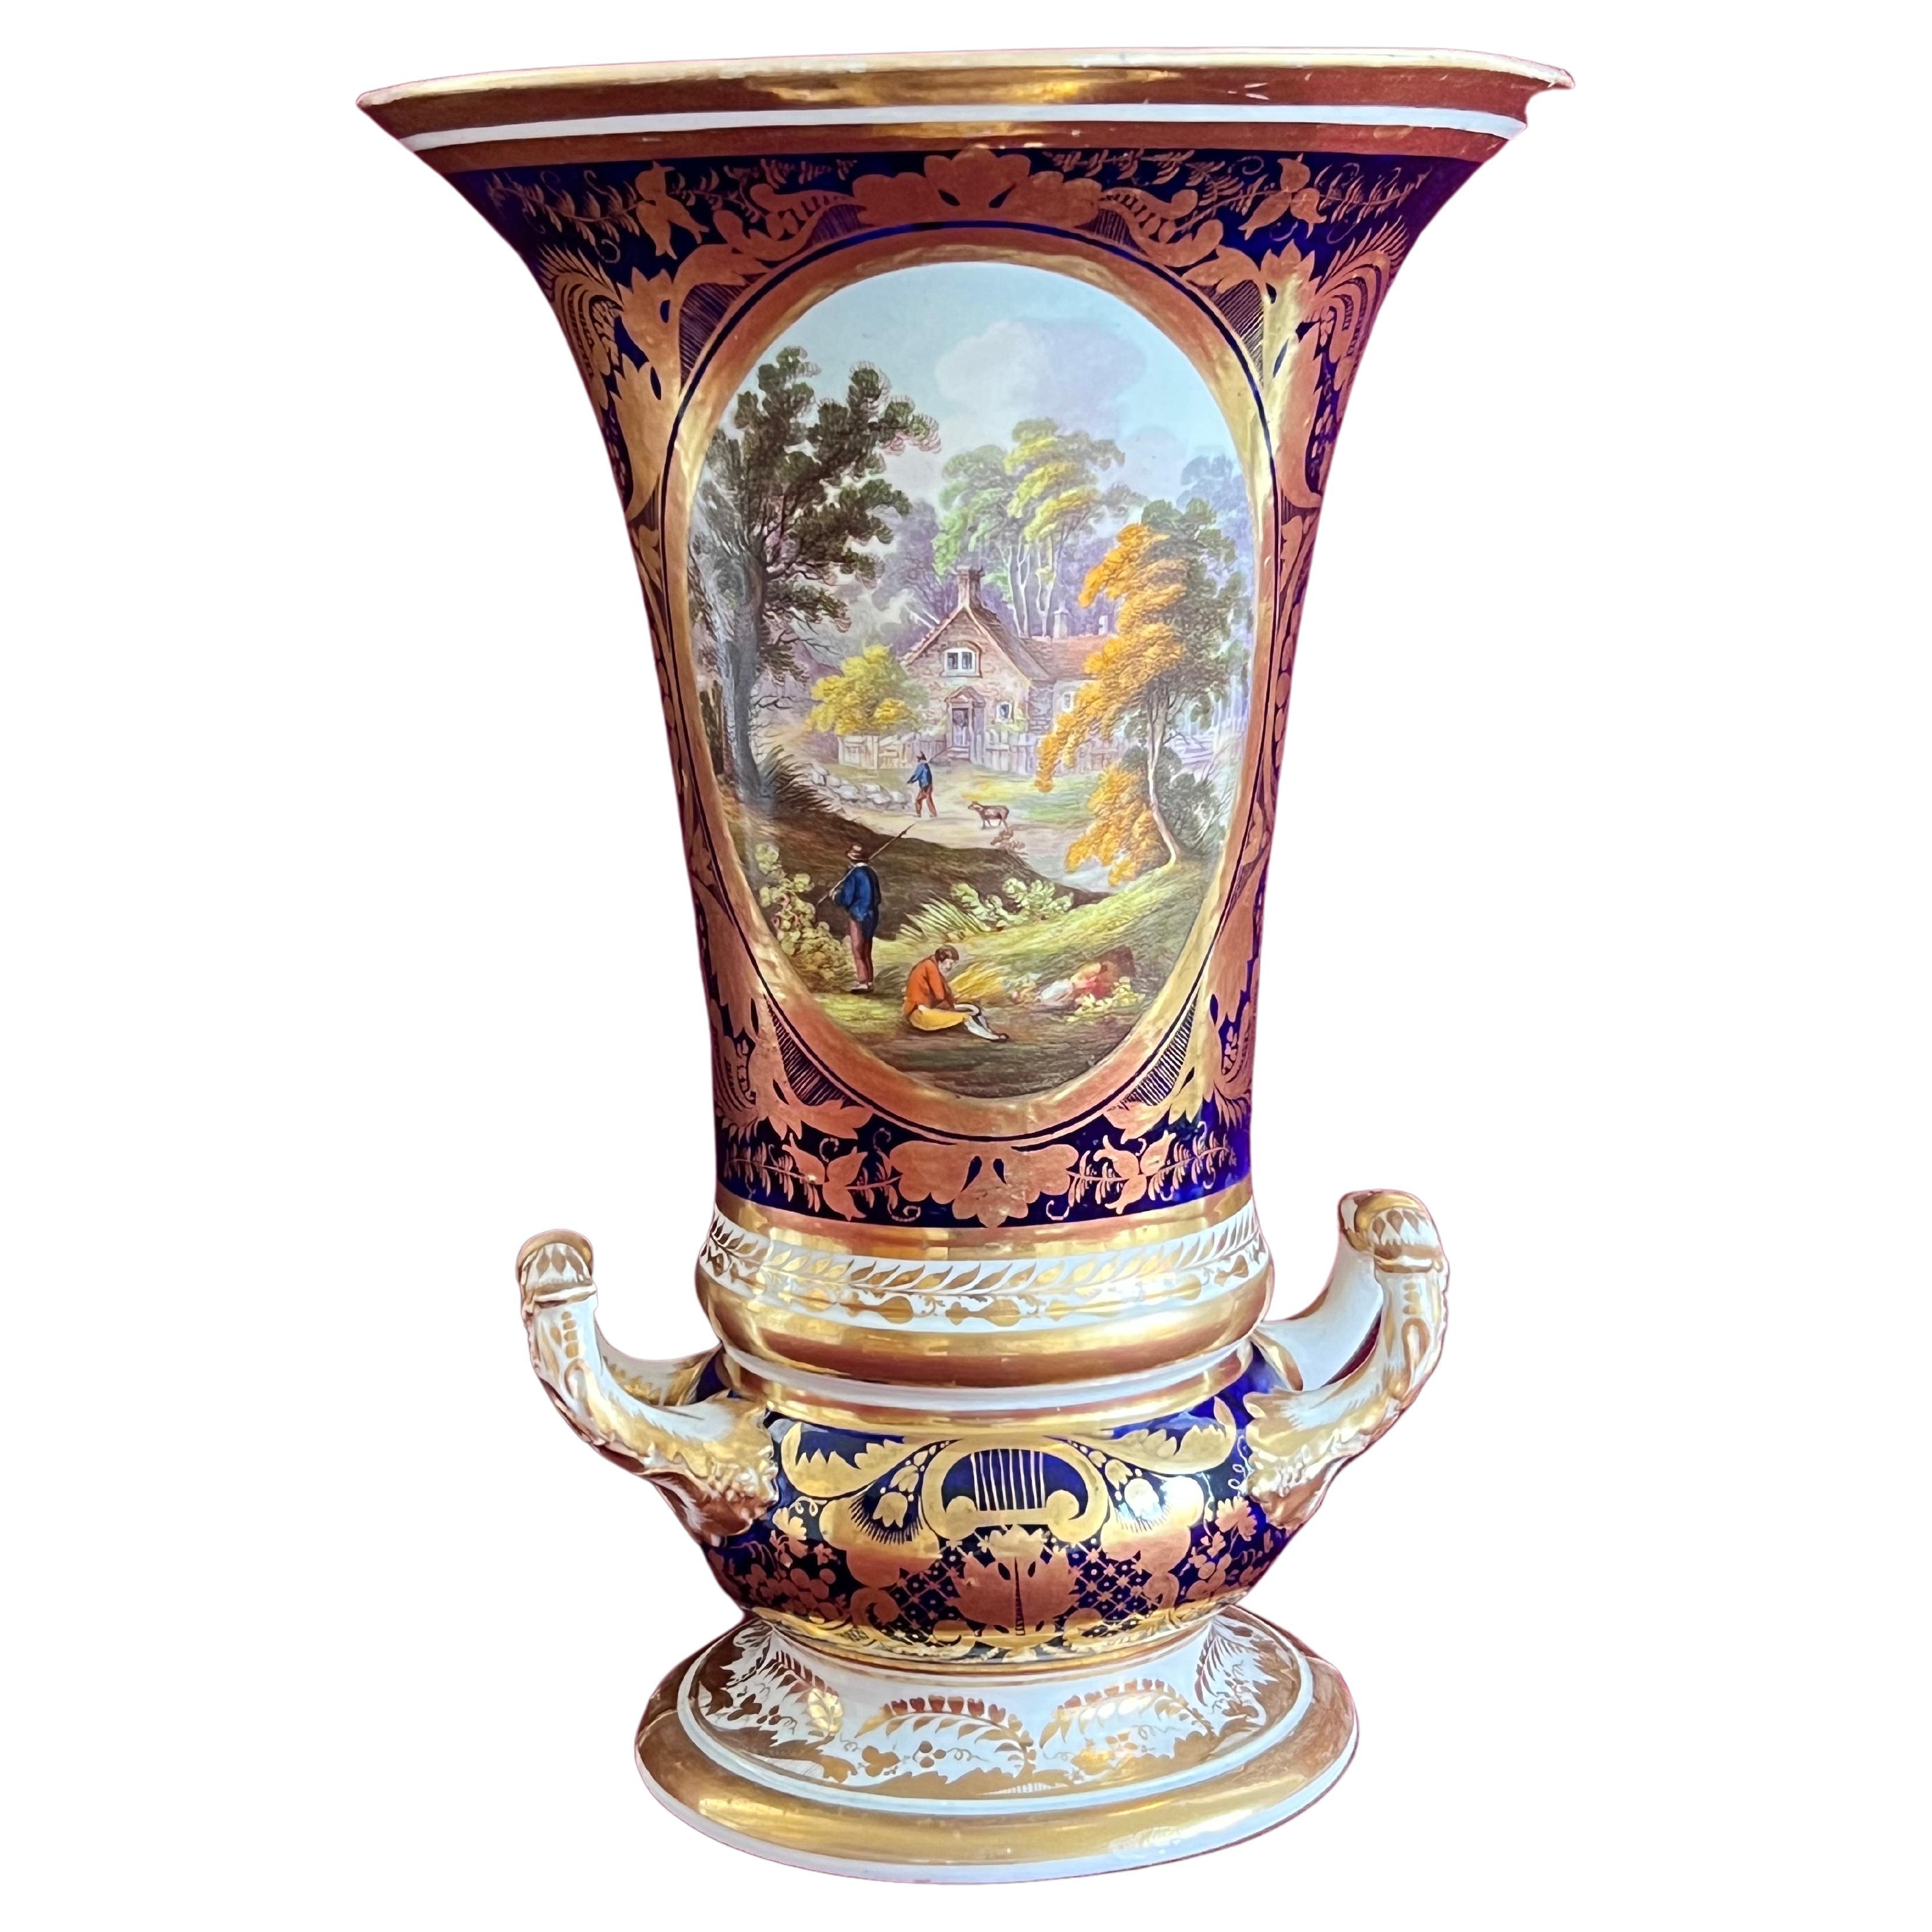 Fine Derby Porcelain Vase Decorated in the Manner of Brewer, circa 1810 For Sale